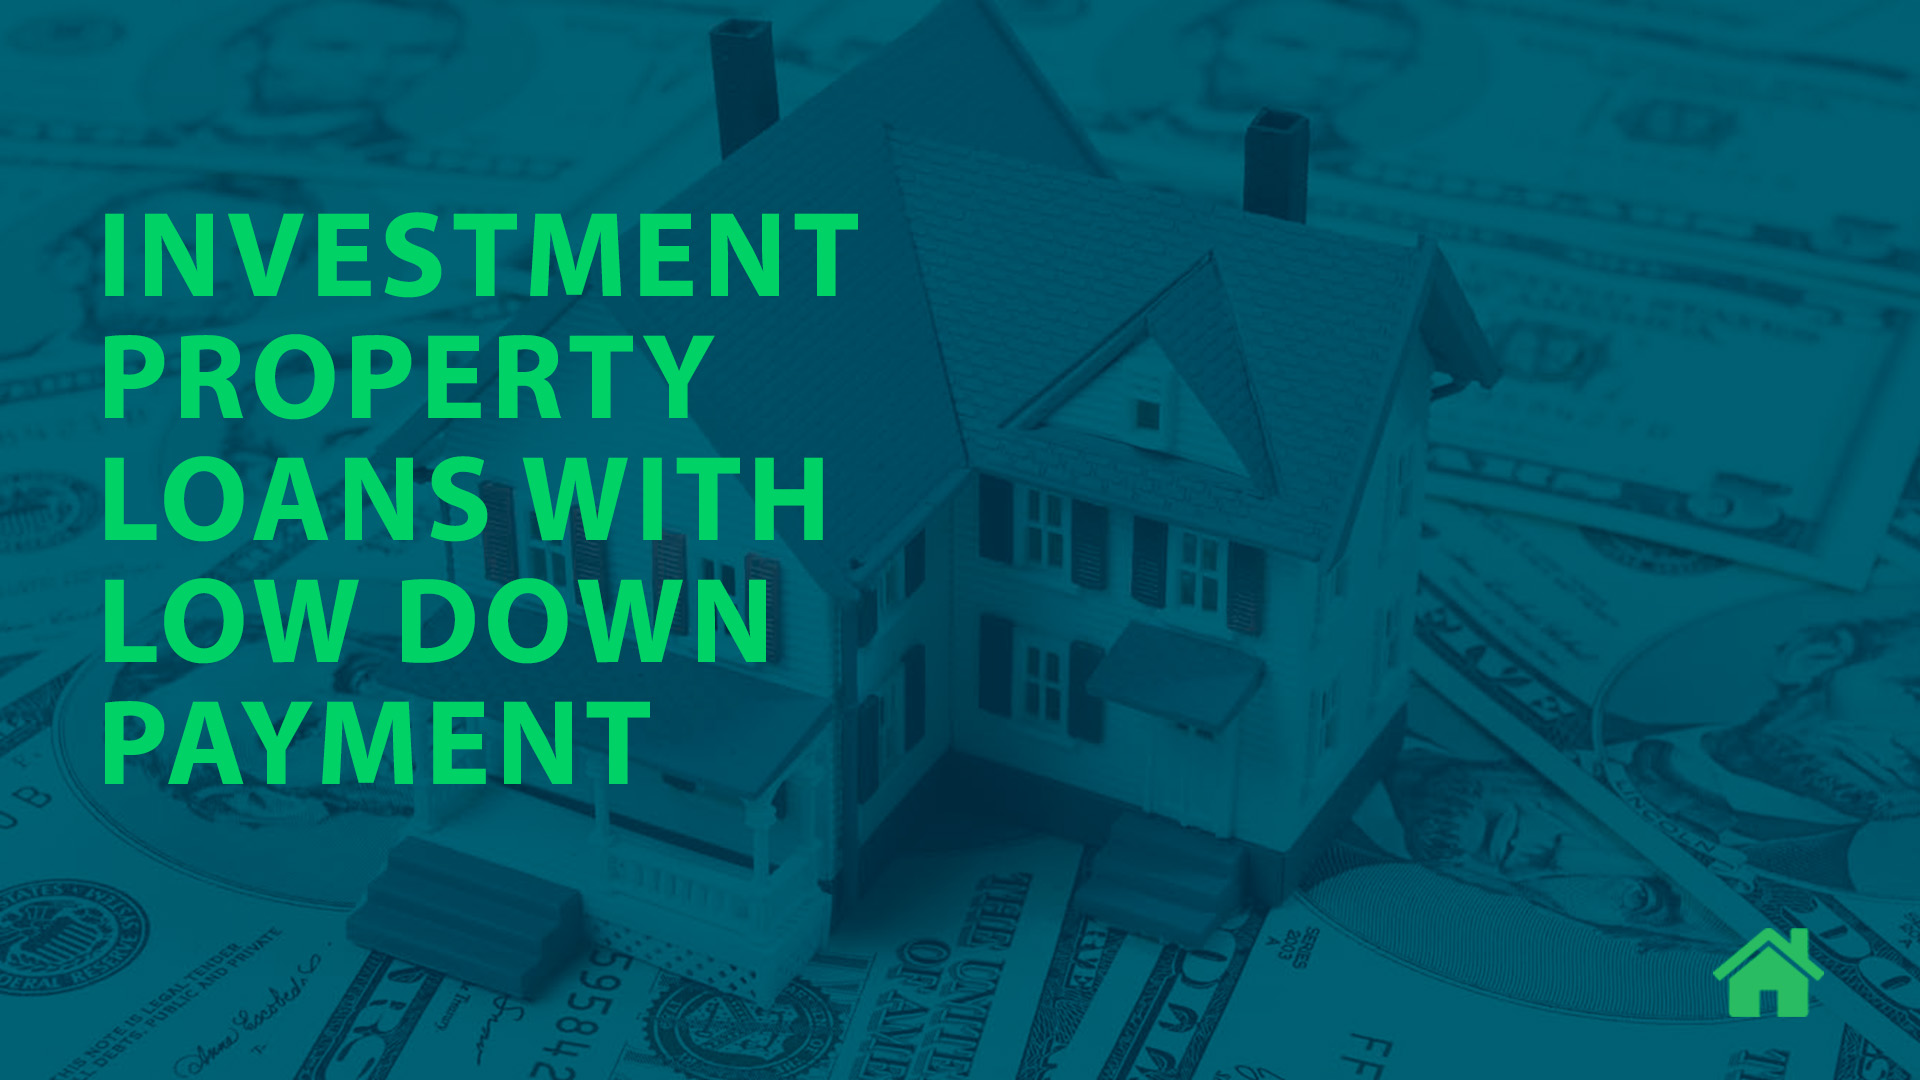 Investment property loans with low down payment